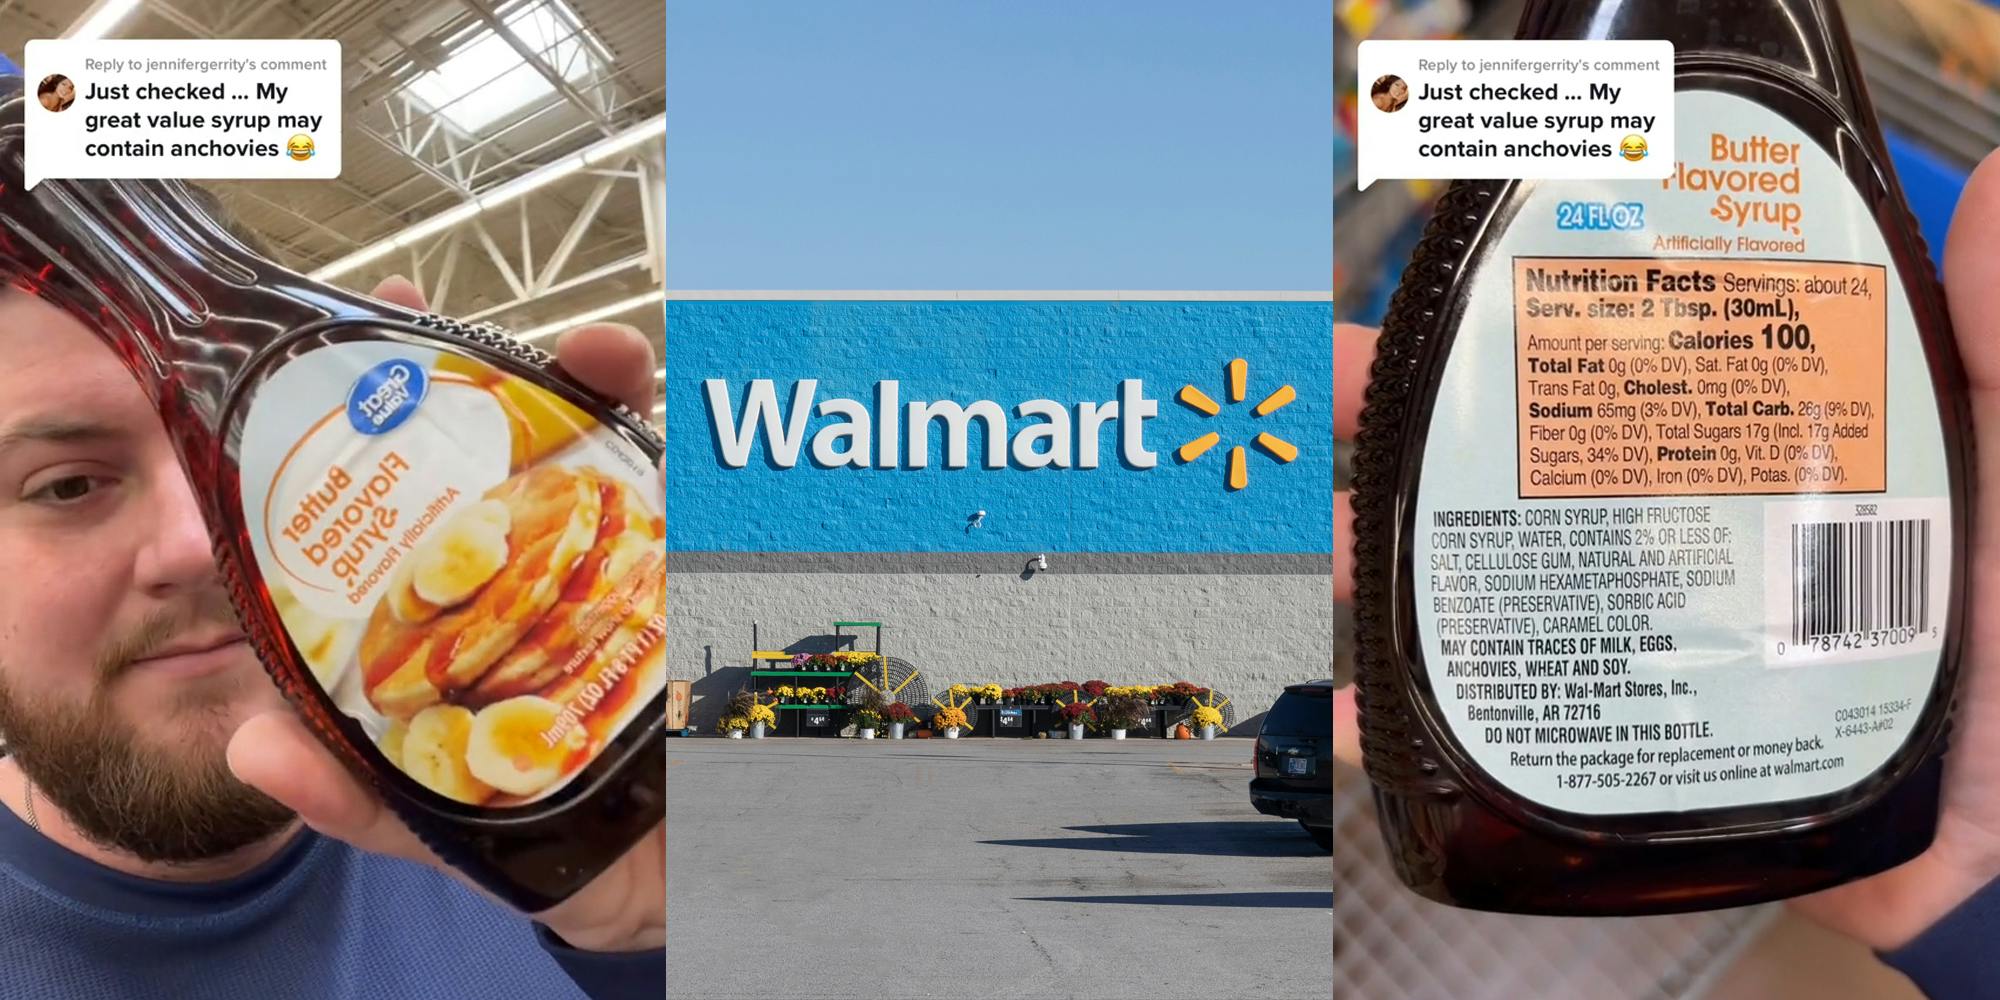 Walmart customer holding up Great Value Butter Flavored Syrup with caption "Just checked...My great value syrup may contain anchovies" (l) Walmart building with sign and blue sky (c) Walmart Great Value Butter Flavored Syrup with caption "Just checked...My great value syrup may contain anchovies" (r)